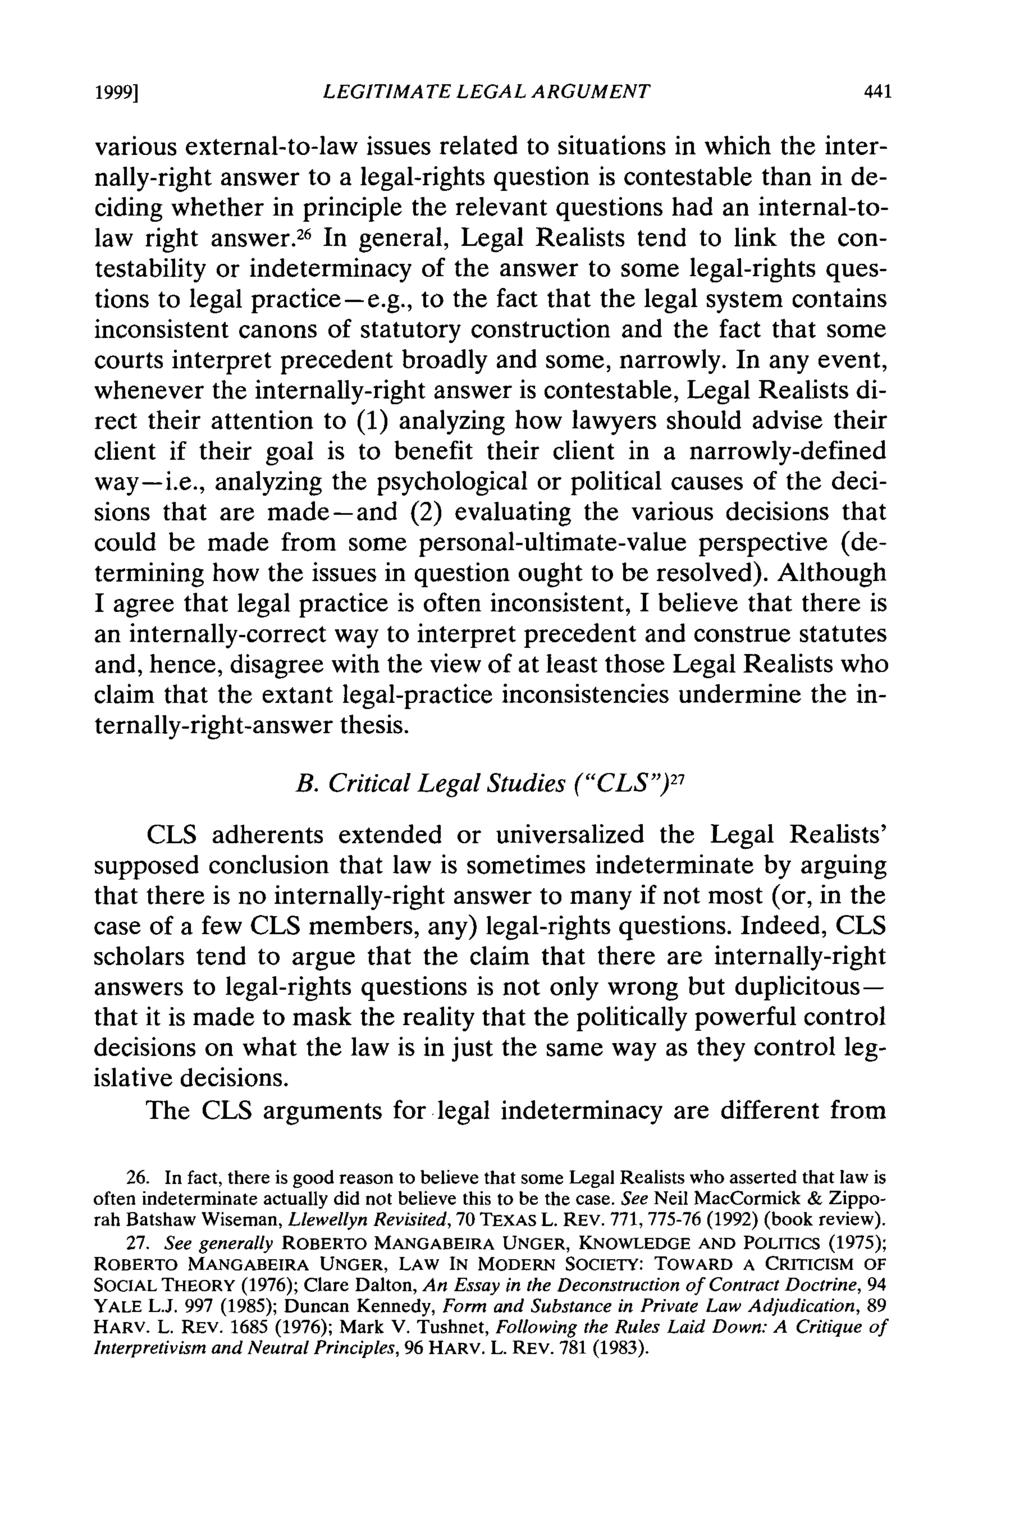 1999] LEGITIMATE LEGAL ARGUMENT various external-to-law issues related to situations in which the internally-right answer to a legal-rights question is contestable than in deciding whether in